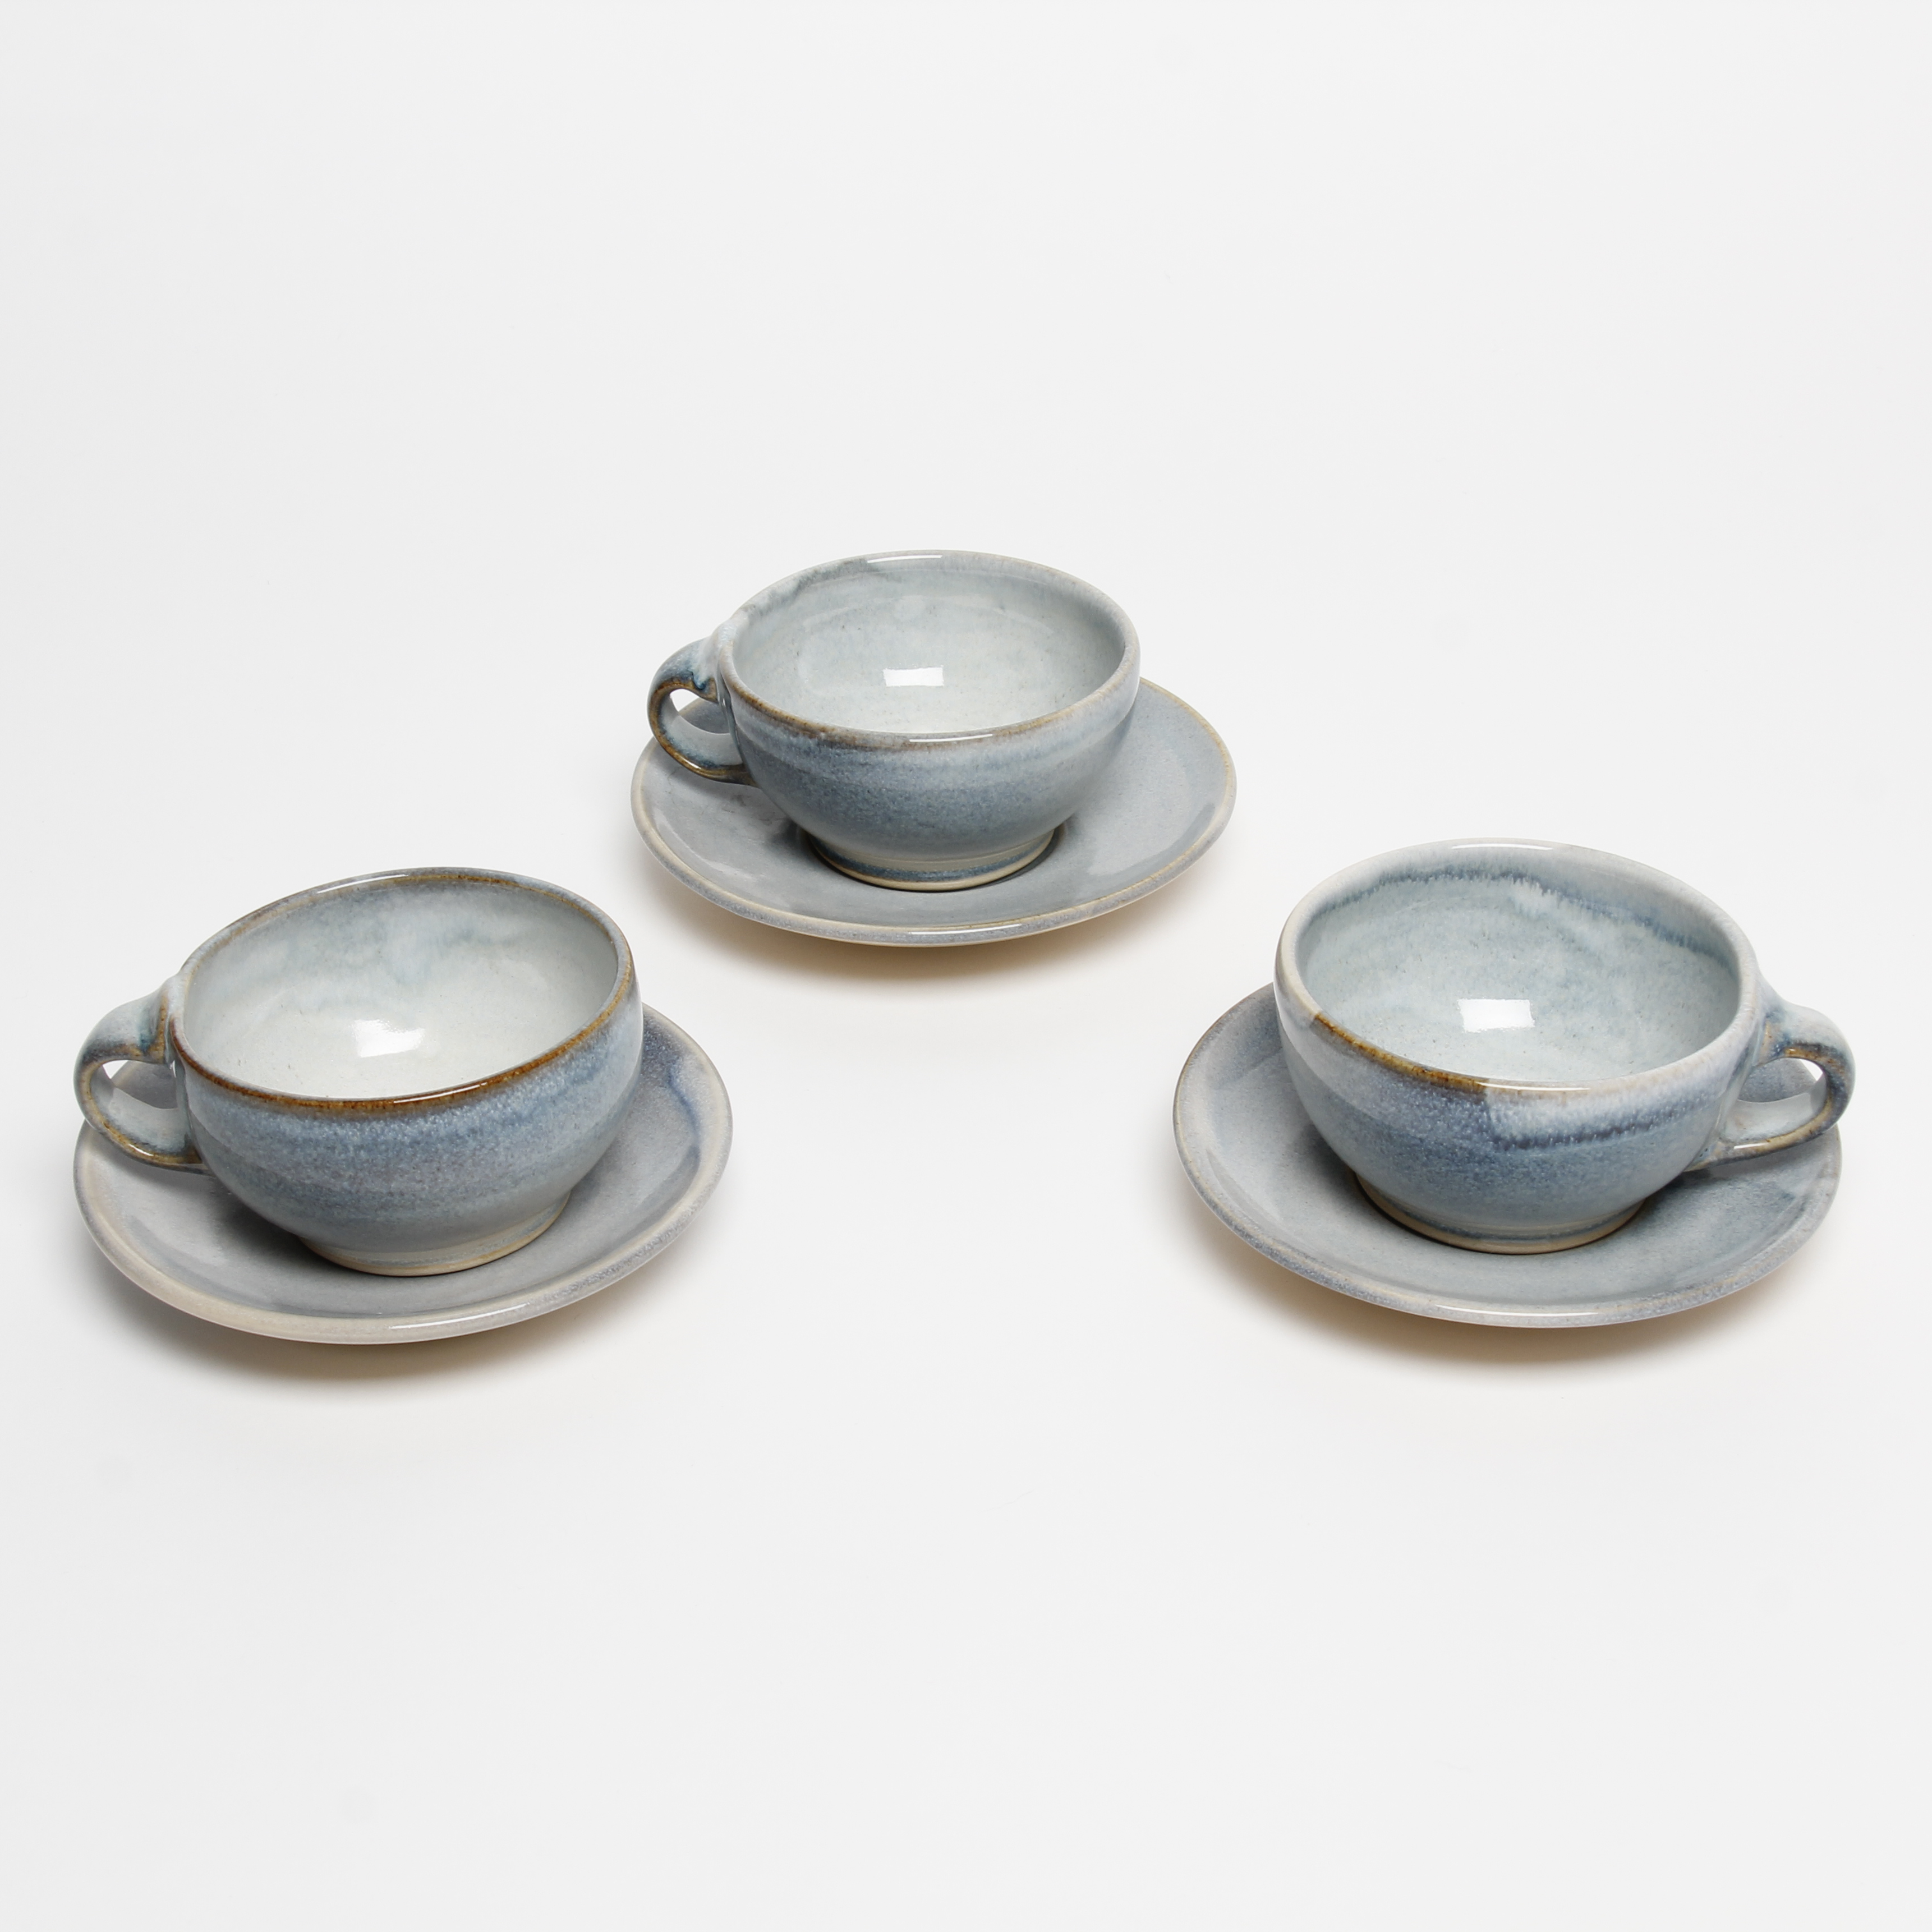 Teresa Dunlop: Cappuccino Cup Product Image 5 of 6